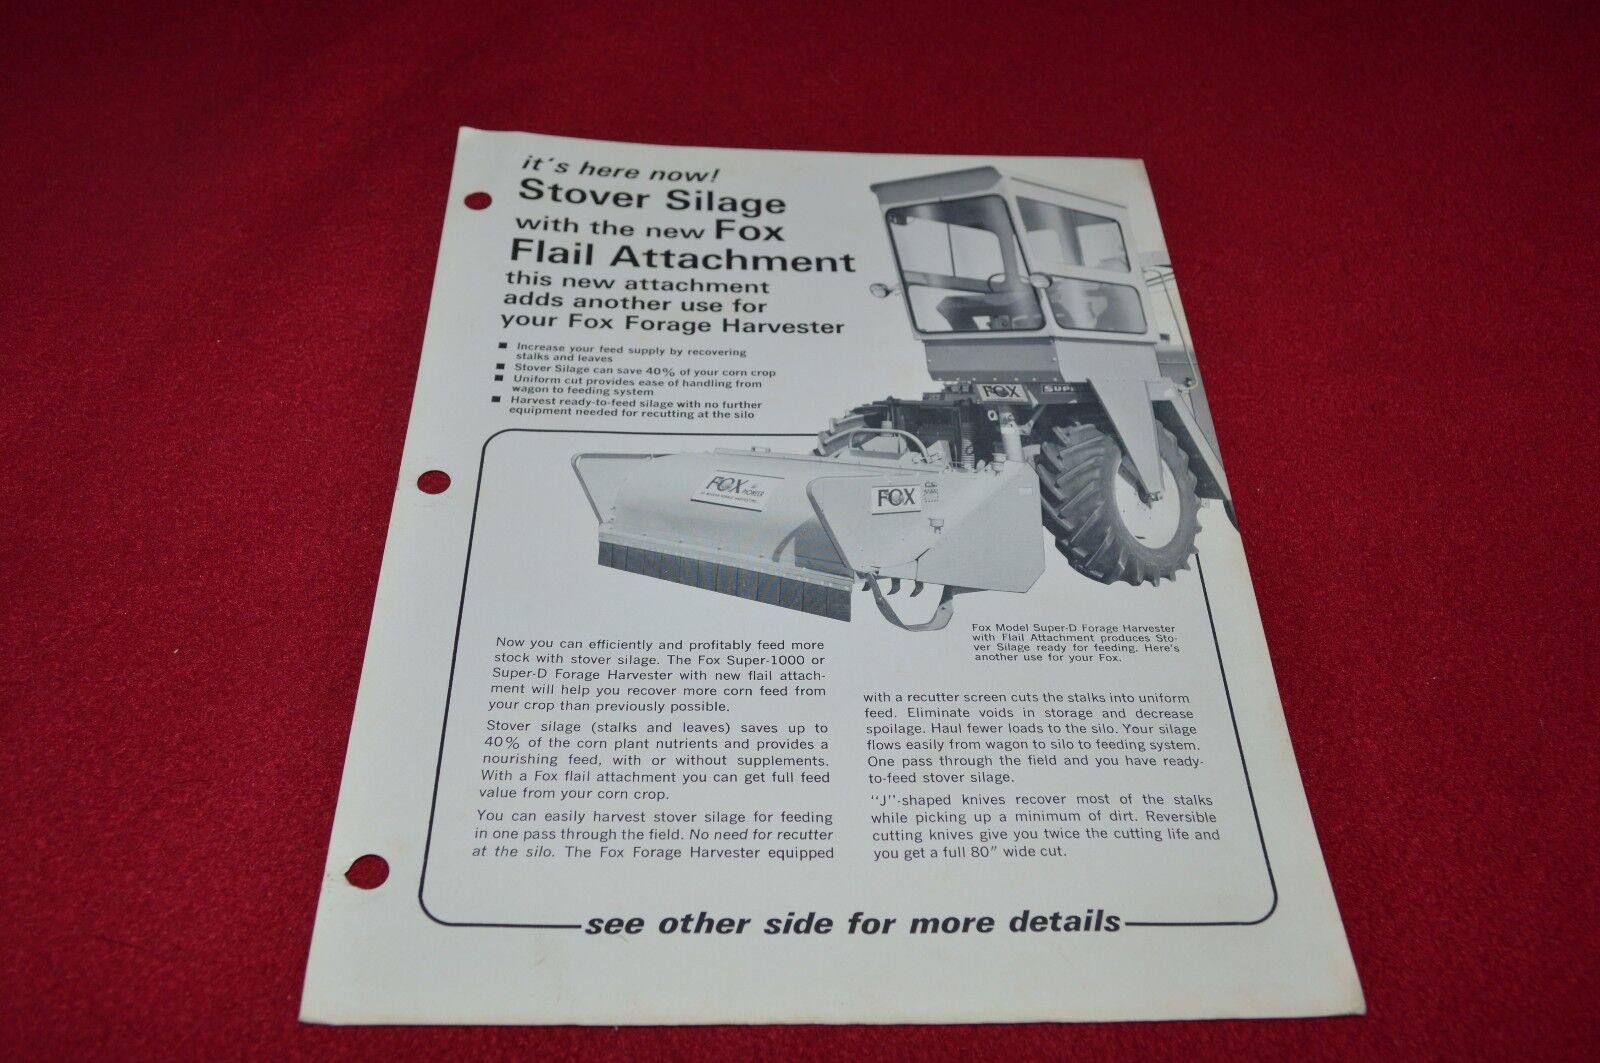 Fox River Tractor Corn Stover Silage Flail Attachment Dealer\'s Brochure YABE15 